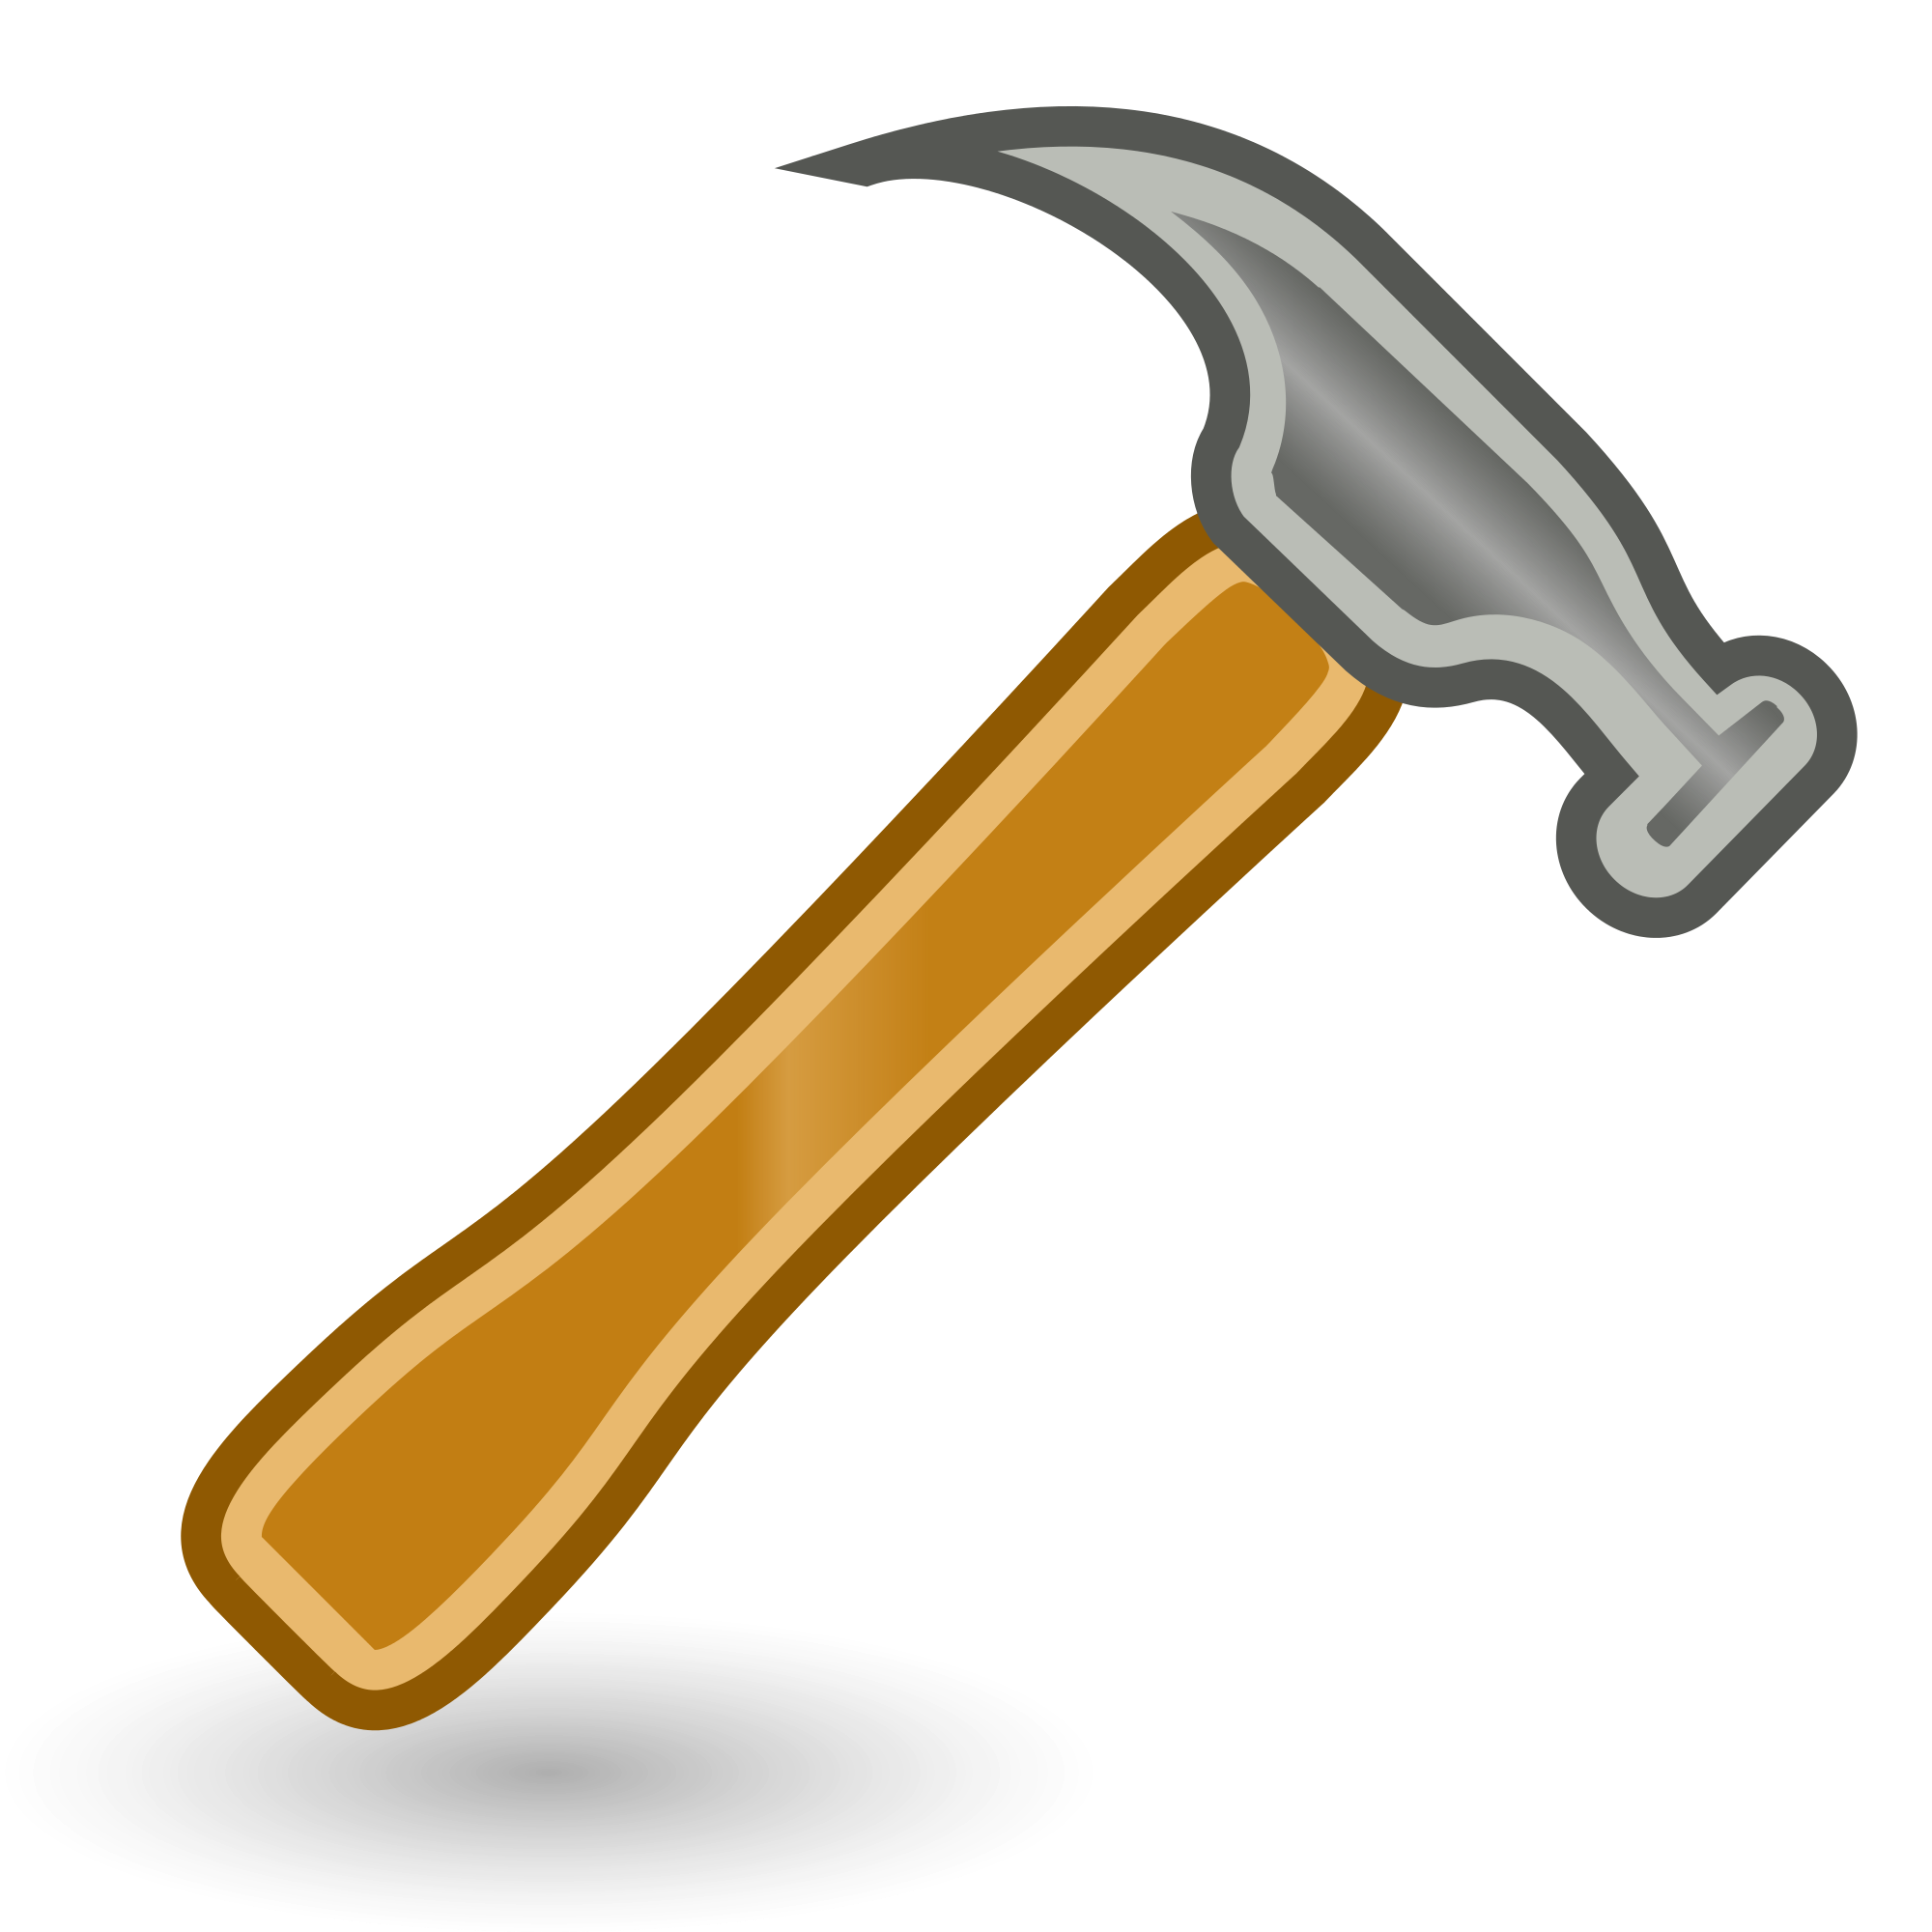 Claw hammer Clip art - hammer png download - 2000*2000 - Free